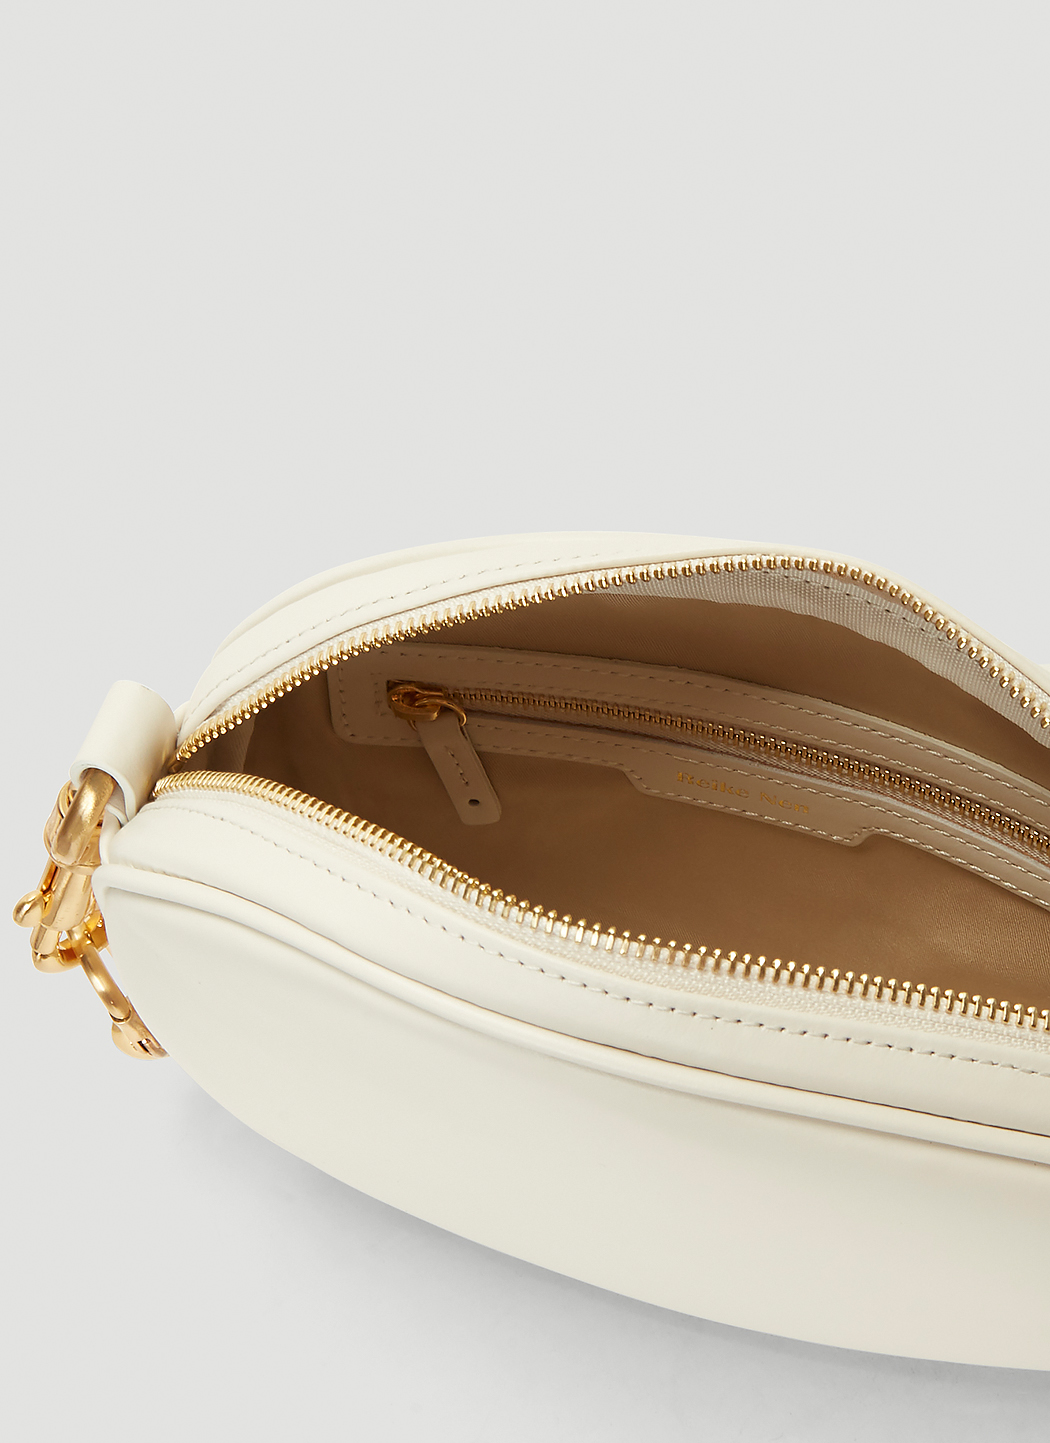 Reike Nen Middle Oval Bag in White | LN-CC